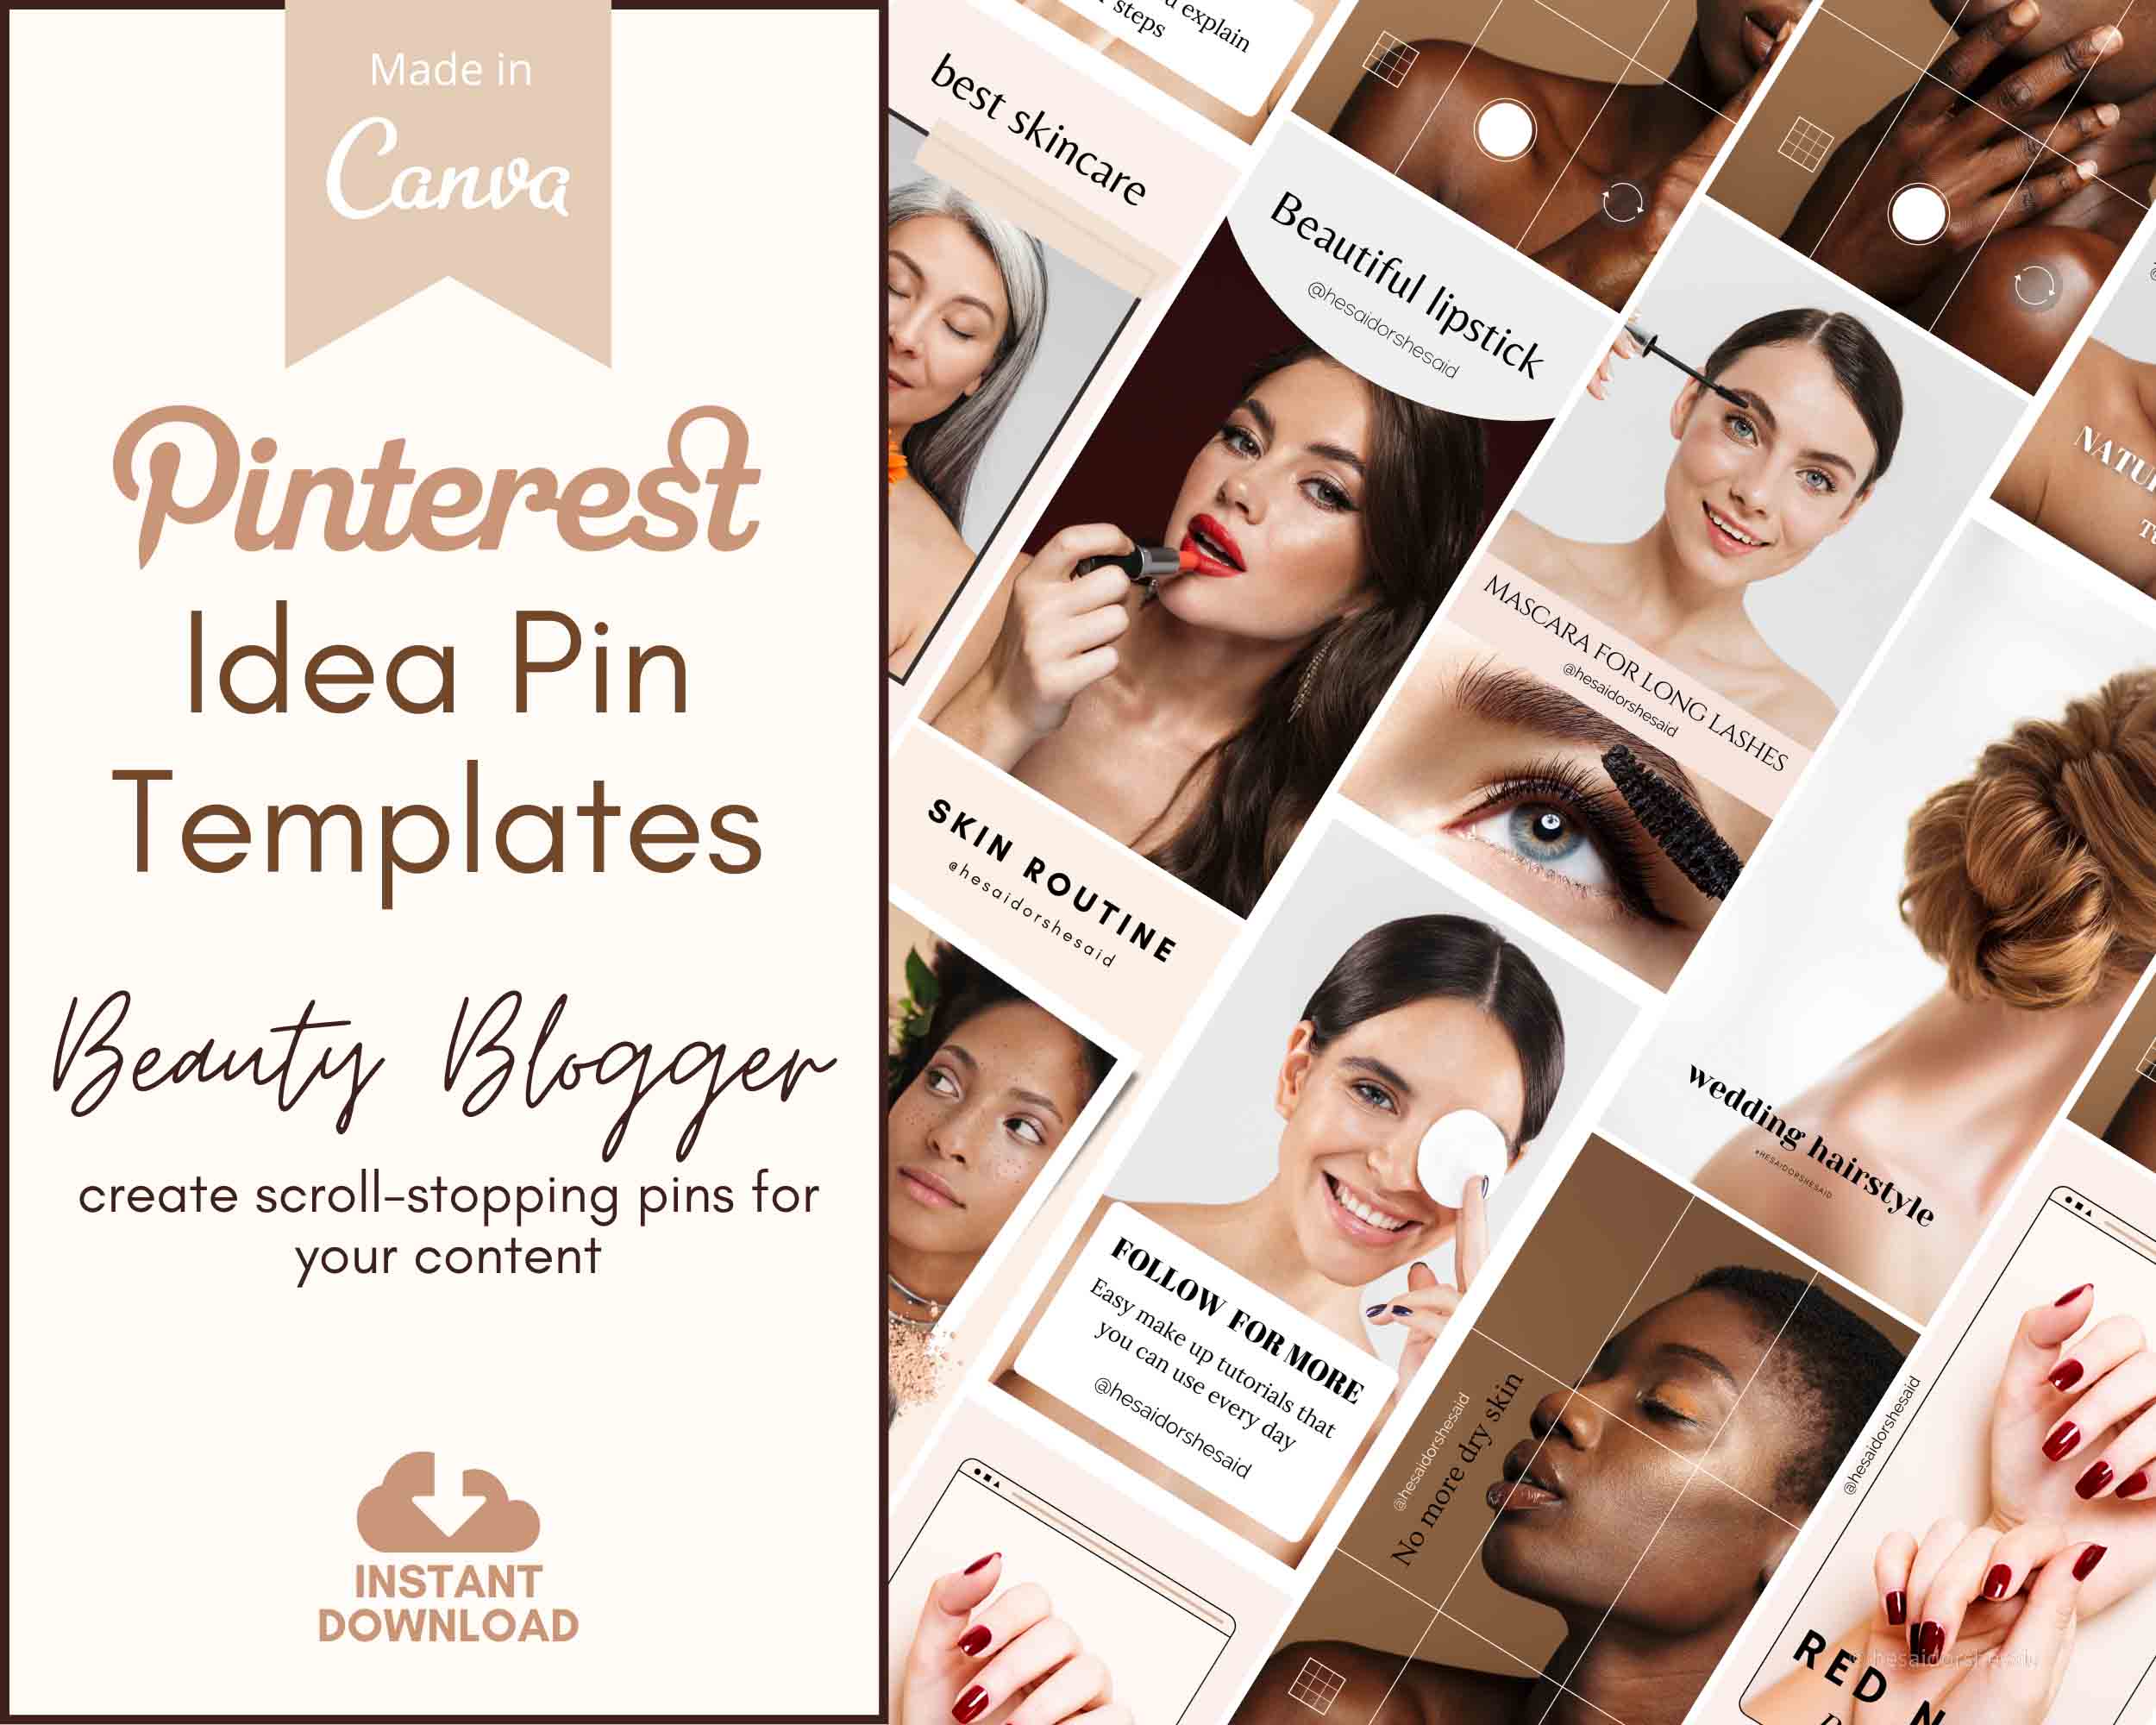 Pinterest Idea Pin Templates for Beauty and Make-Up